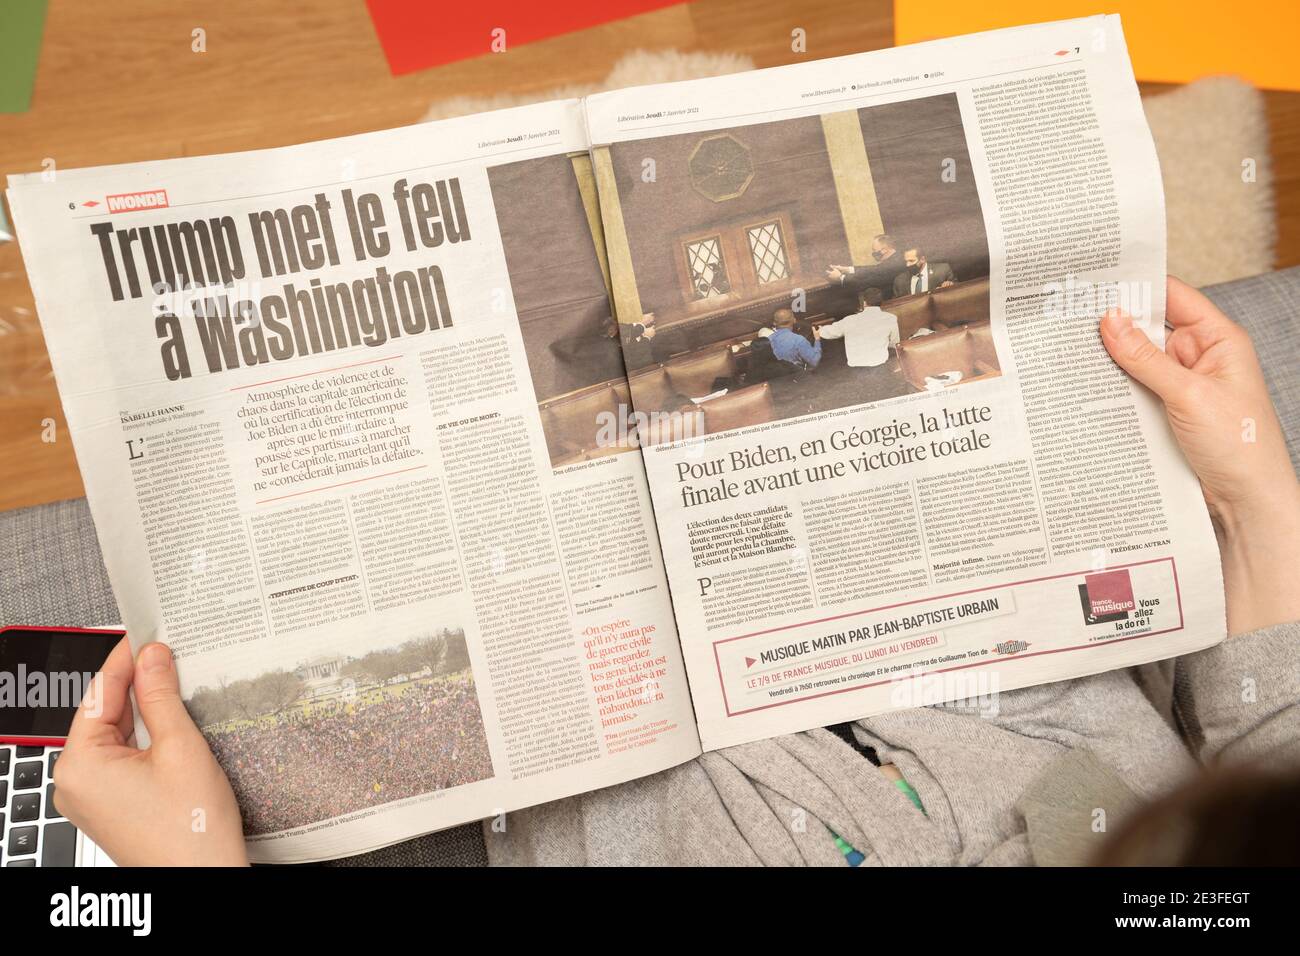 Paris, France - Jan 7, 2020: Woman reading on couch French newspaper Liberation interiour page show storming of the U.S. Capitol by supporters of U.S. President Donald Trump on January 07, 2021 Stock Photo